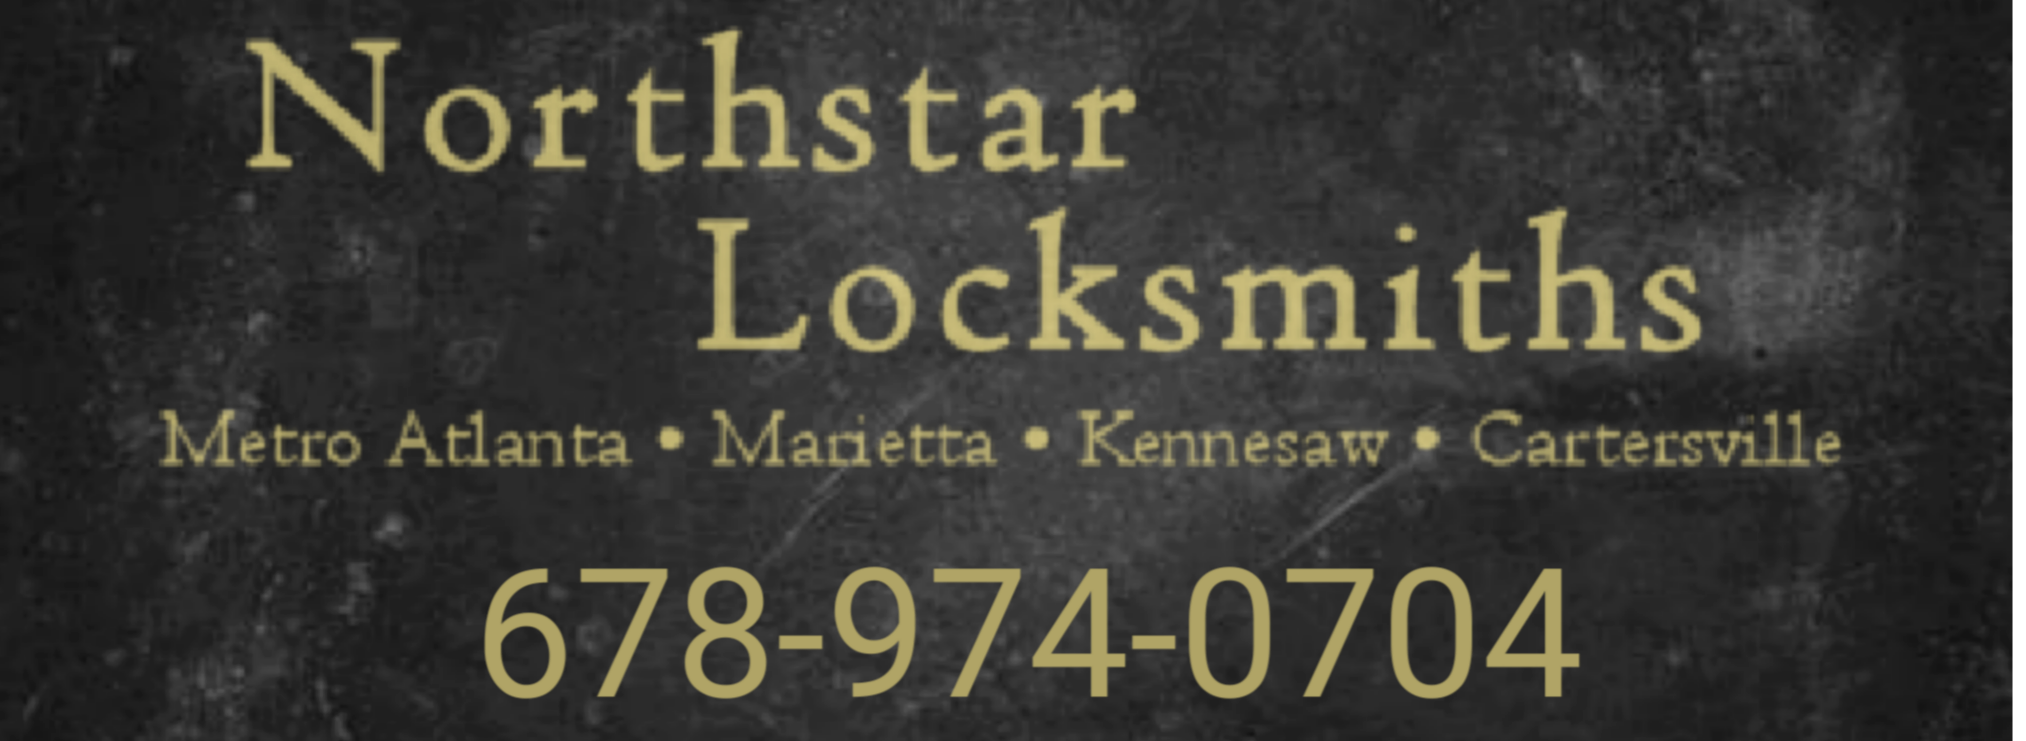 Northstar Locksmiths Has Proudly Been Serving Marietta For 24 Years.